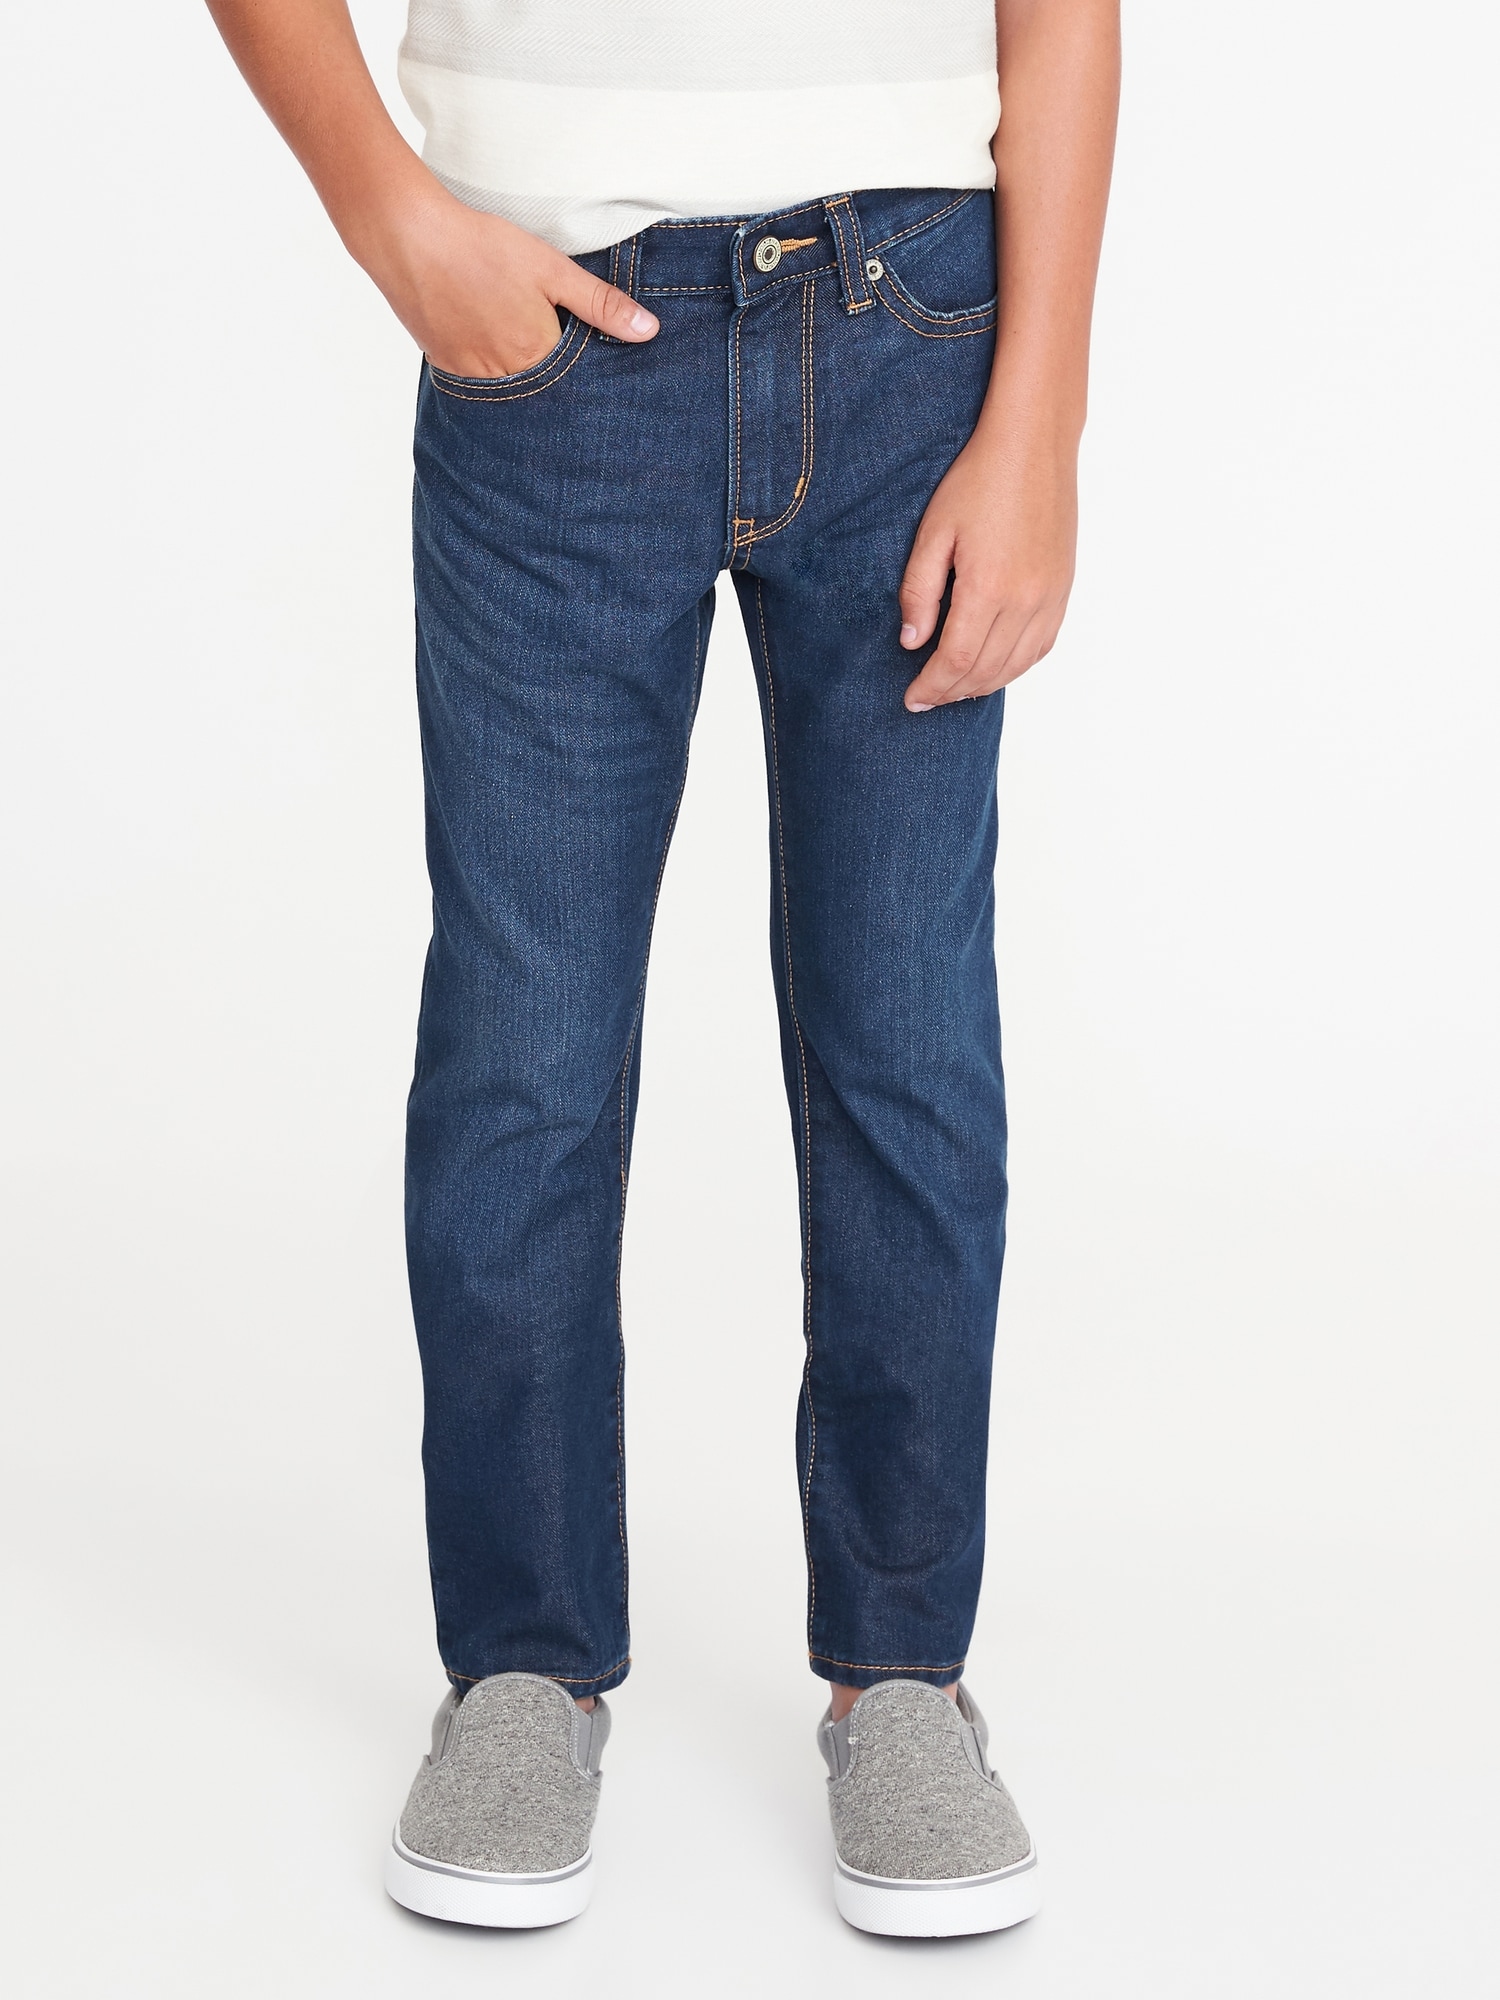 Boys Navy Non-Stretch for Skinny Wow Jeans | Old